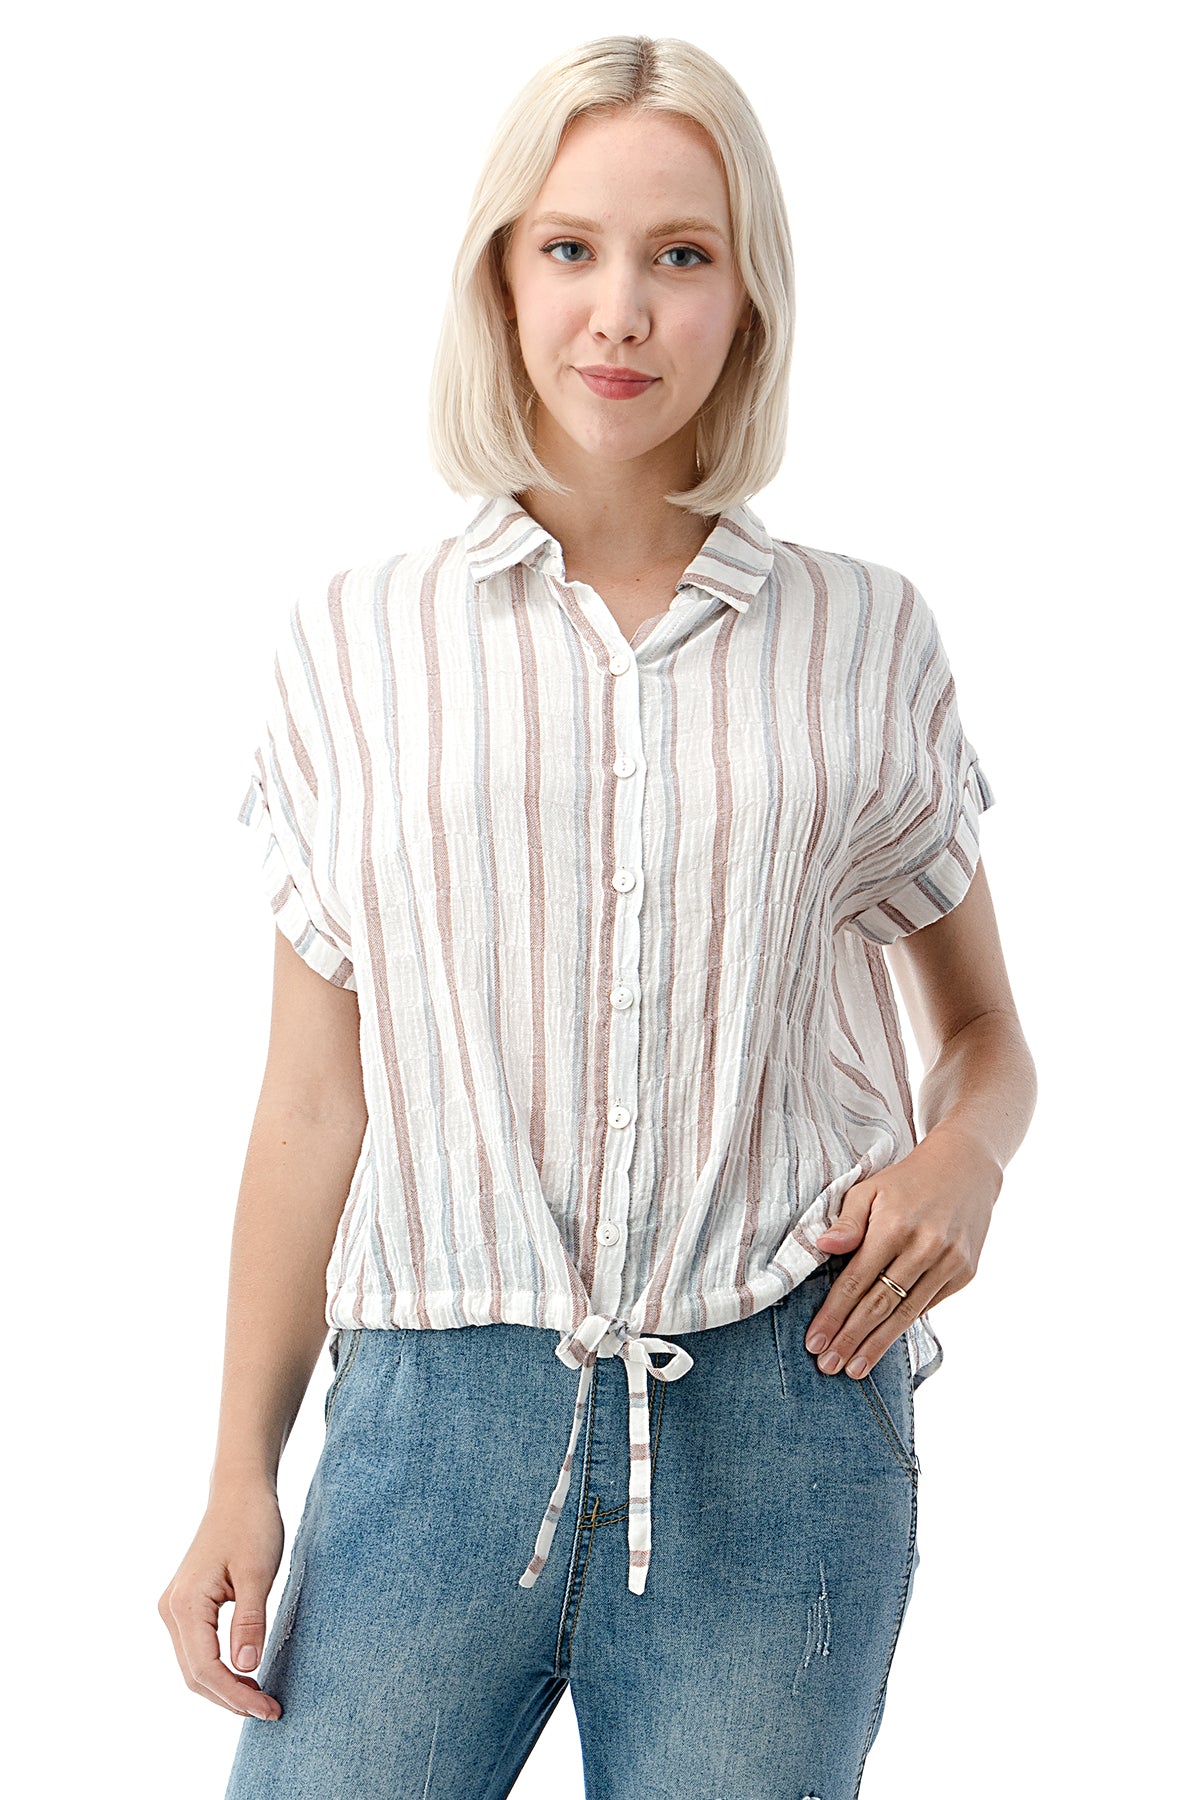 EDGY Land Girl's and Women's Collared Bottom Tie Button Down Short Sleeve Shirt